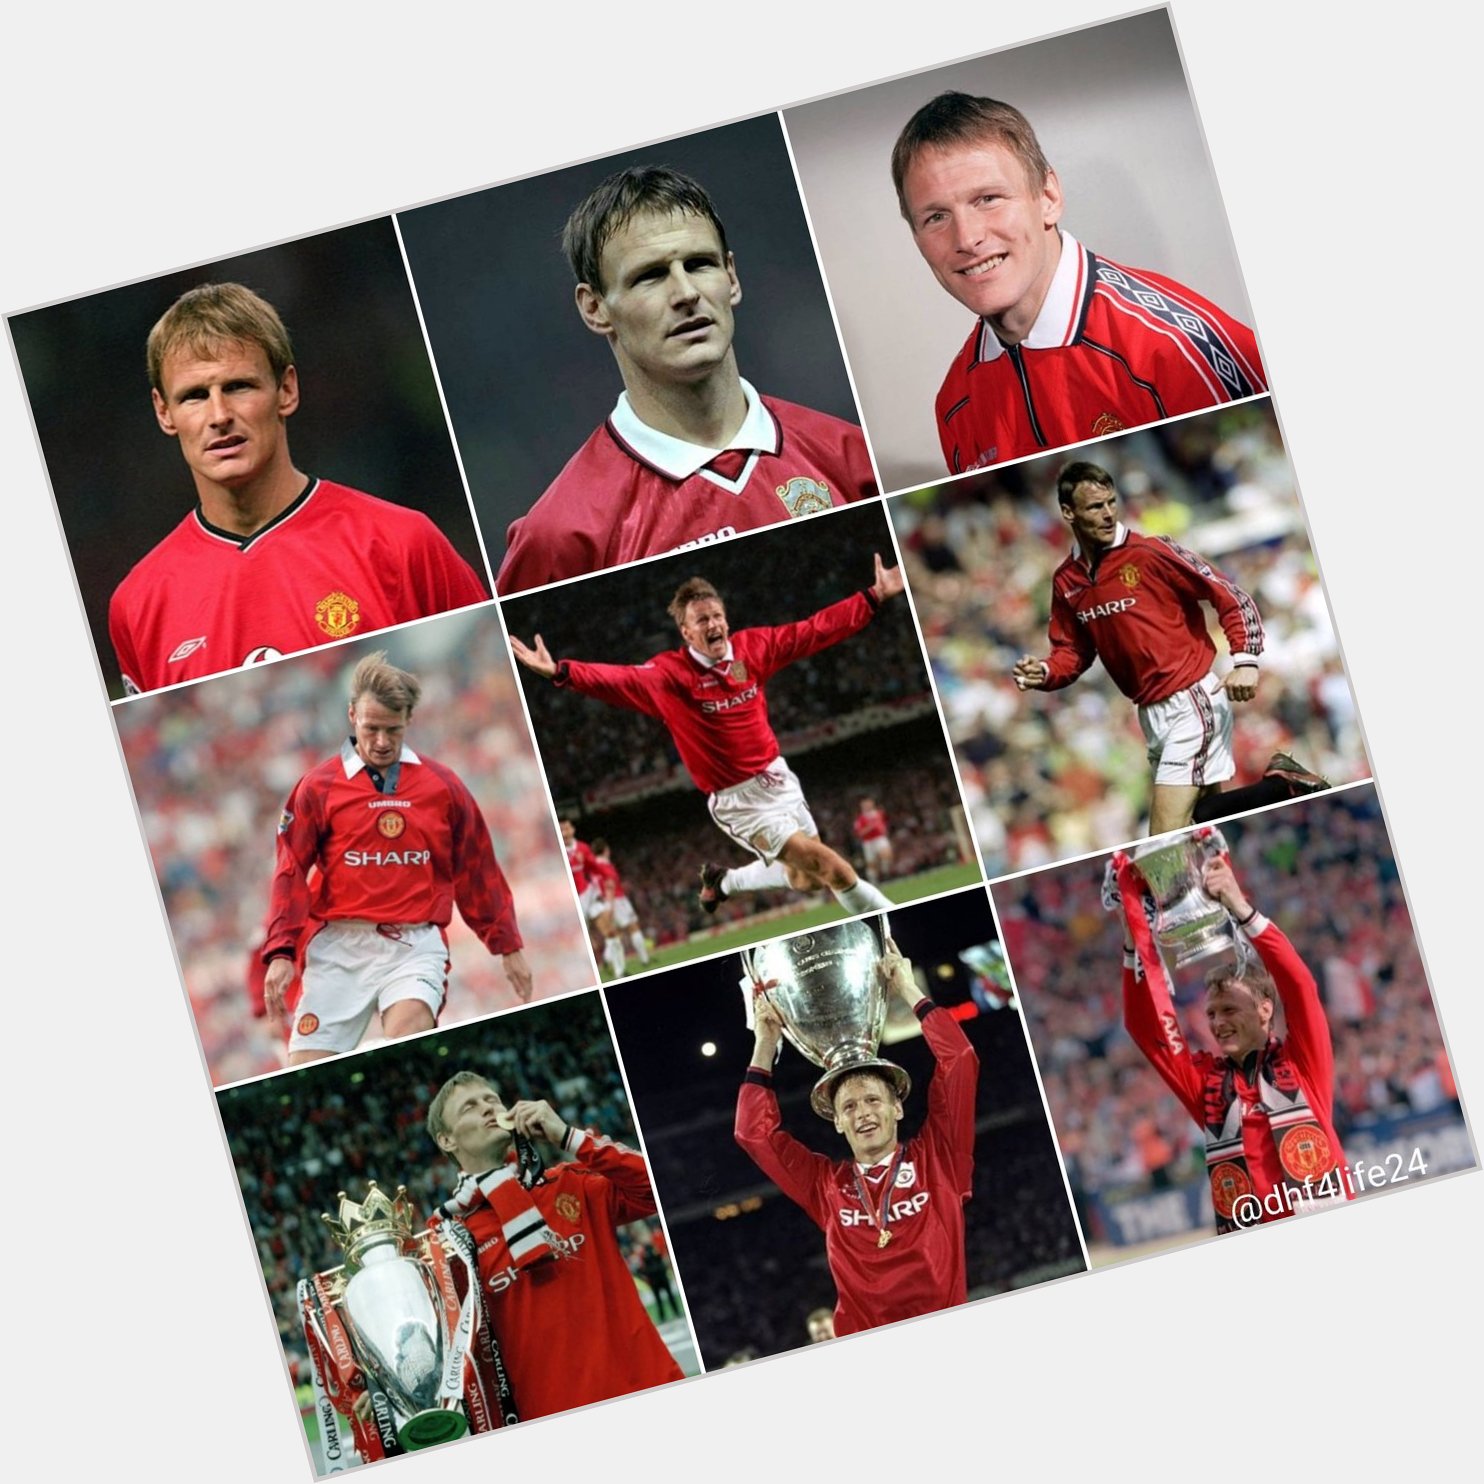 Happy 56th Birthday   on 02 April 2022 to Teddy Sheringham - What a Player and LEGEND... 